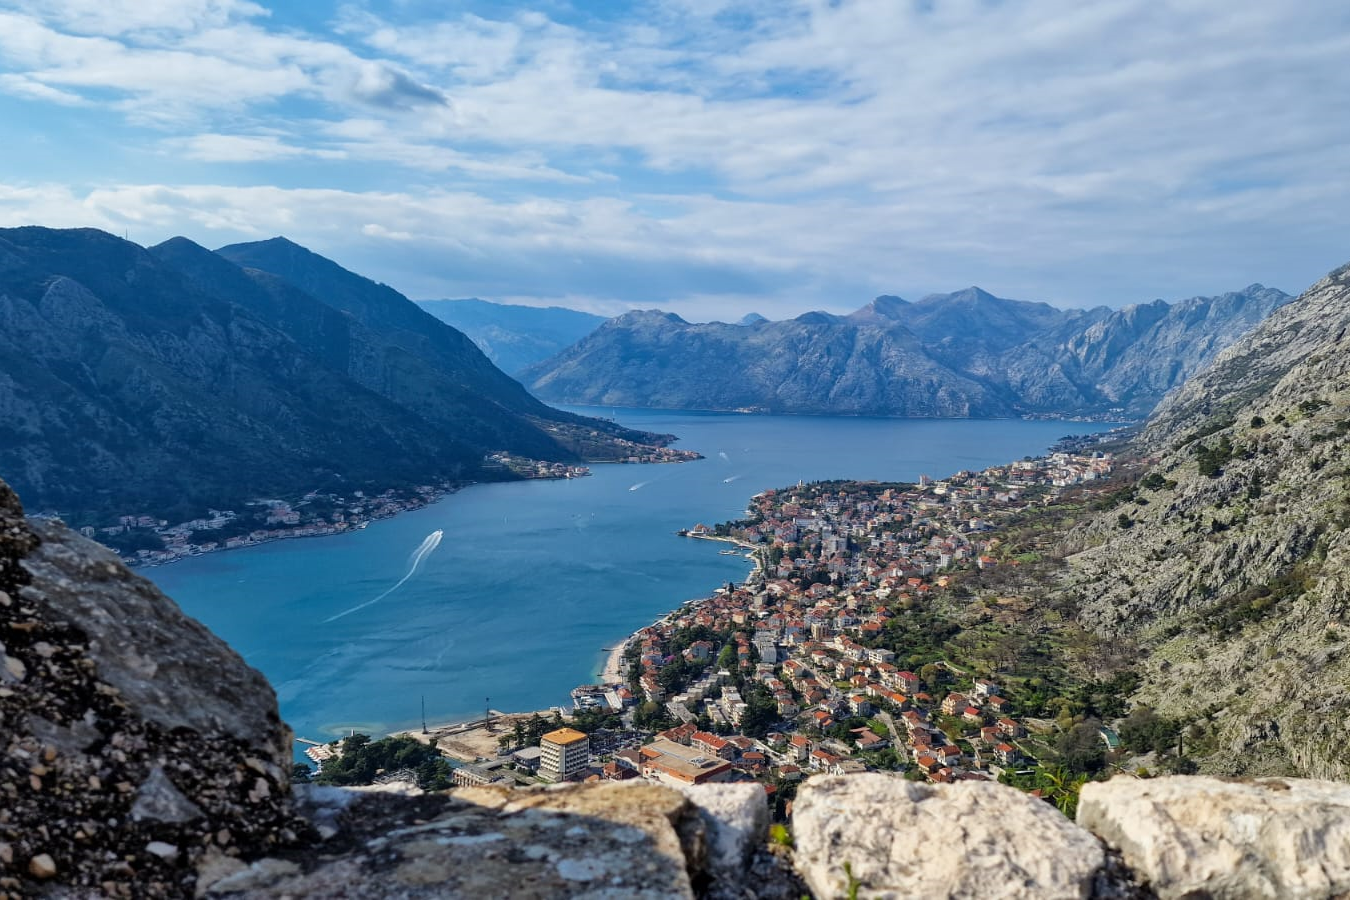 Kotor, Montenegro, the bay, and the surrounding mountains viewed from the city walls